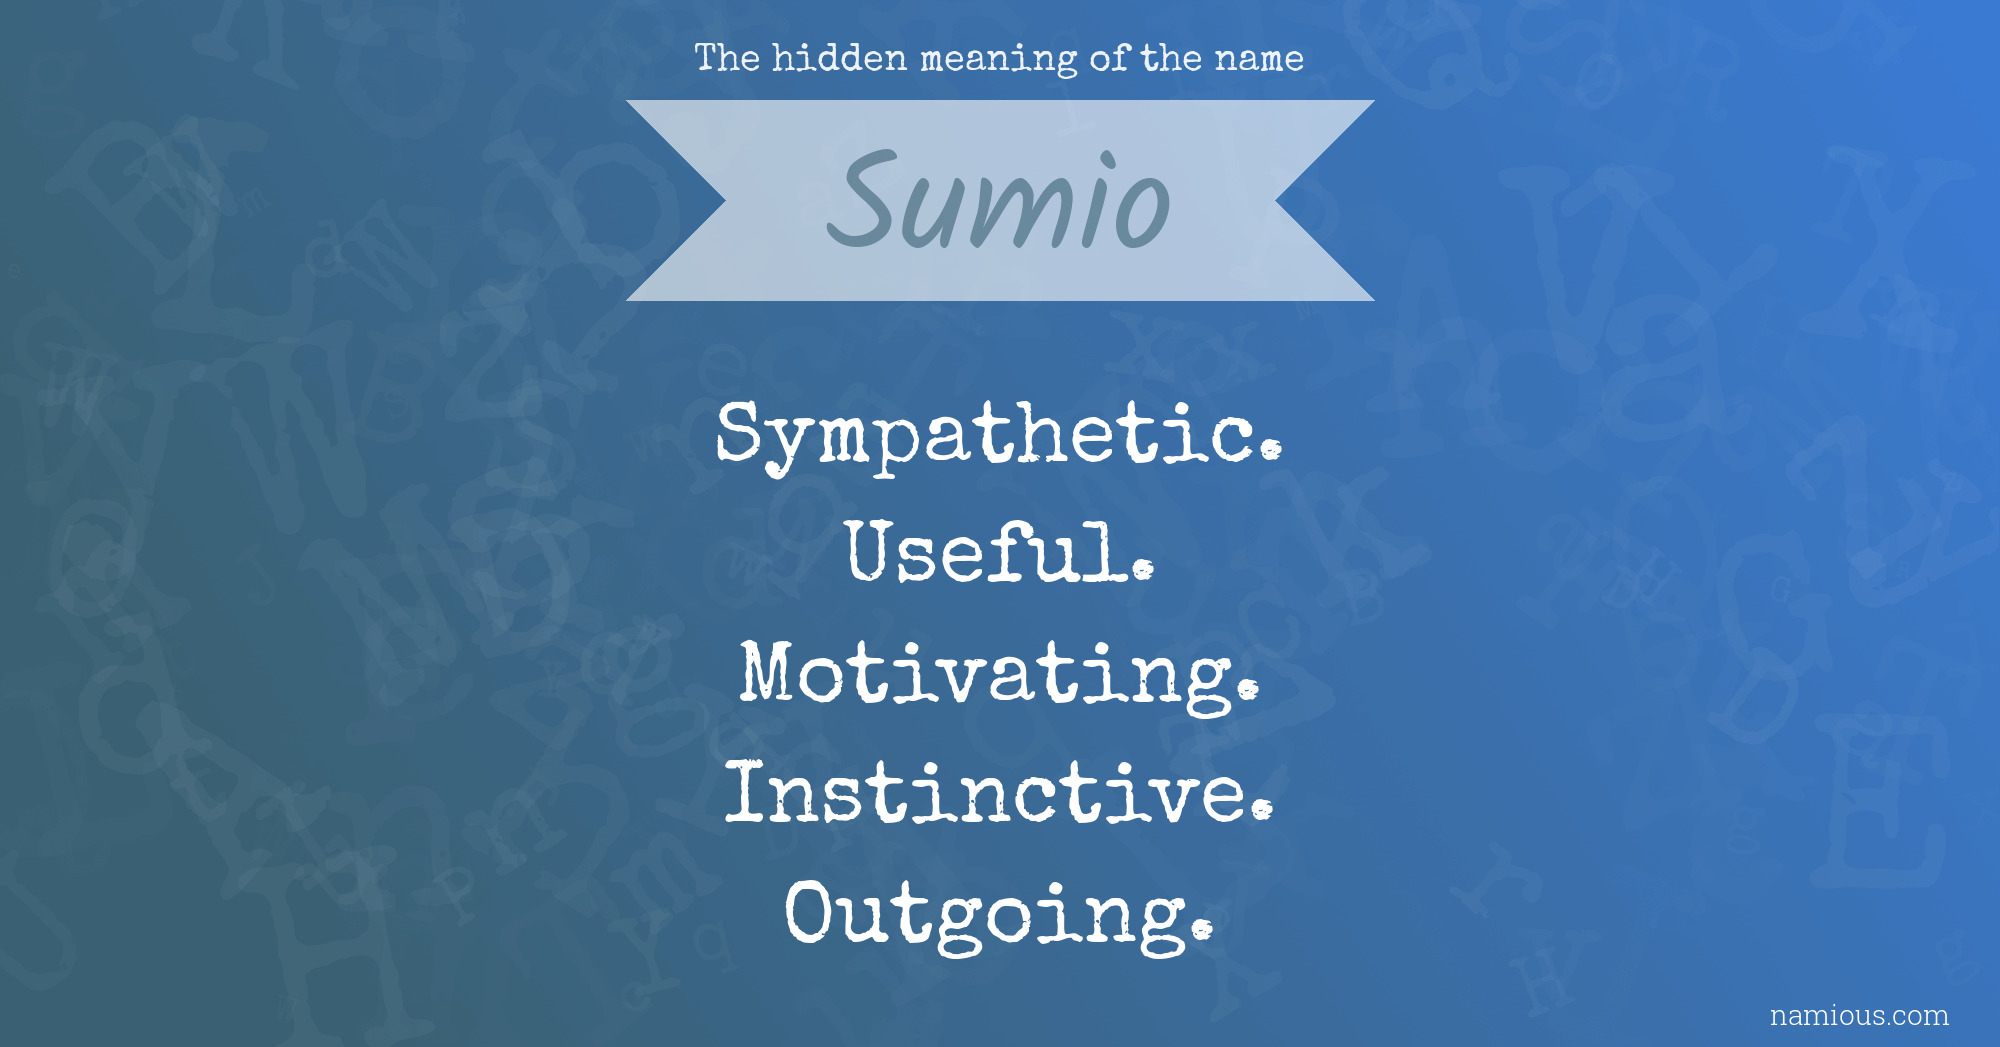 The hidden meaning of the name Sumio